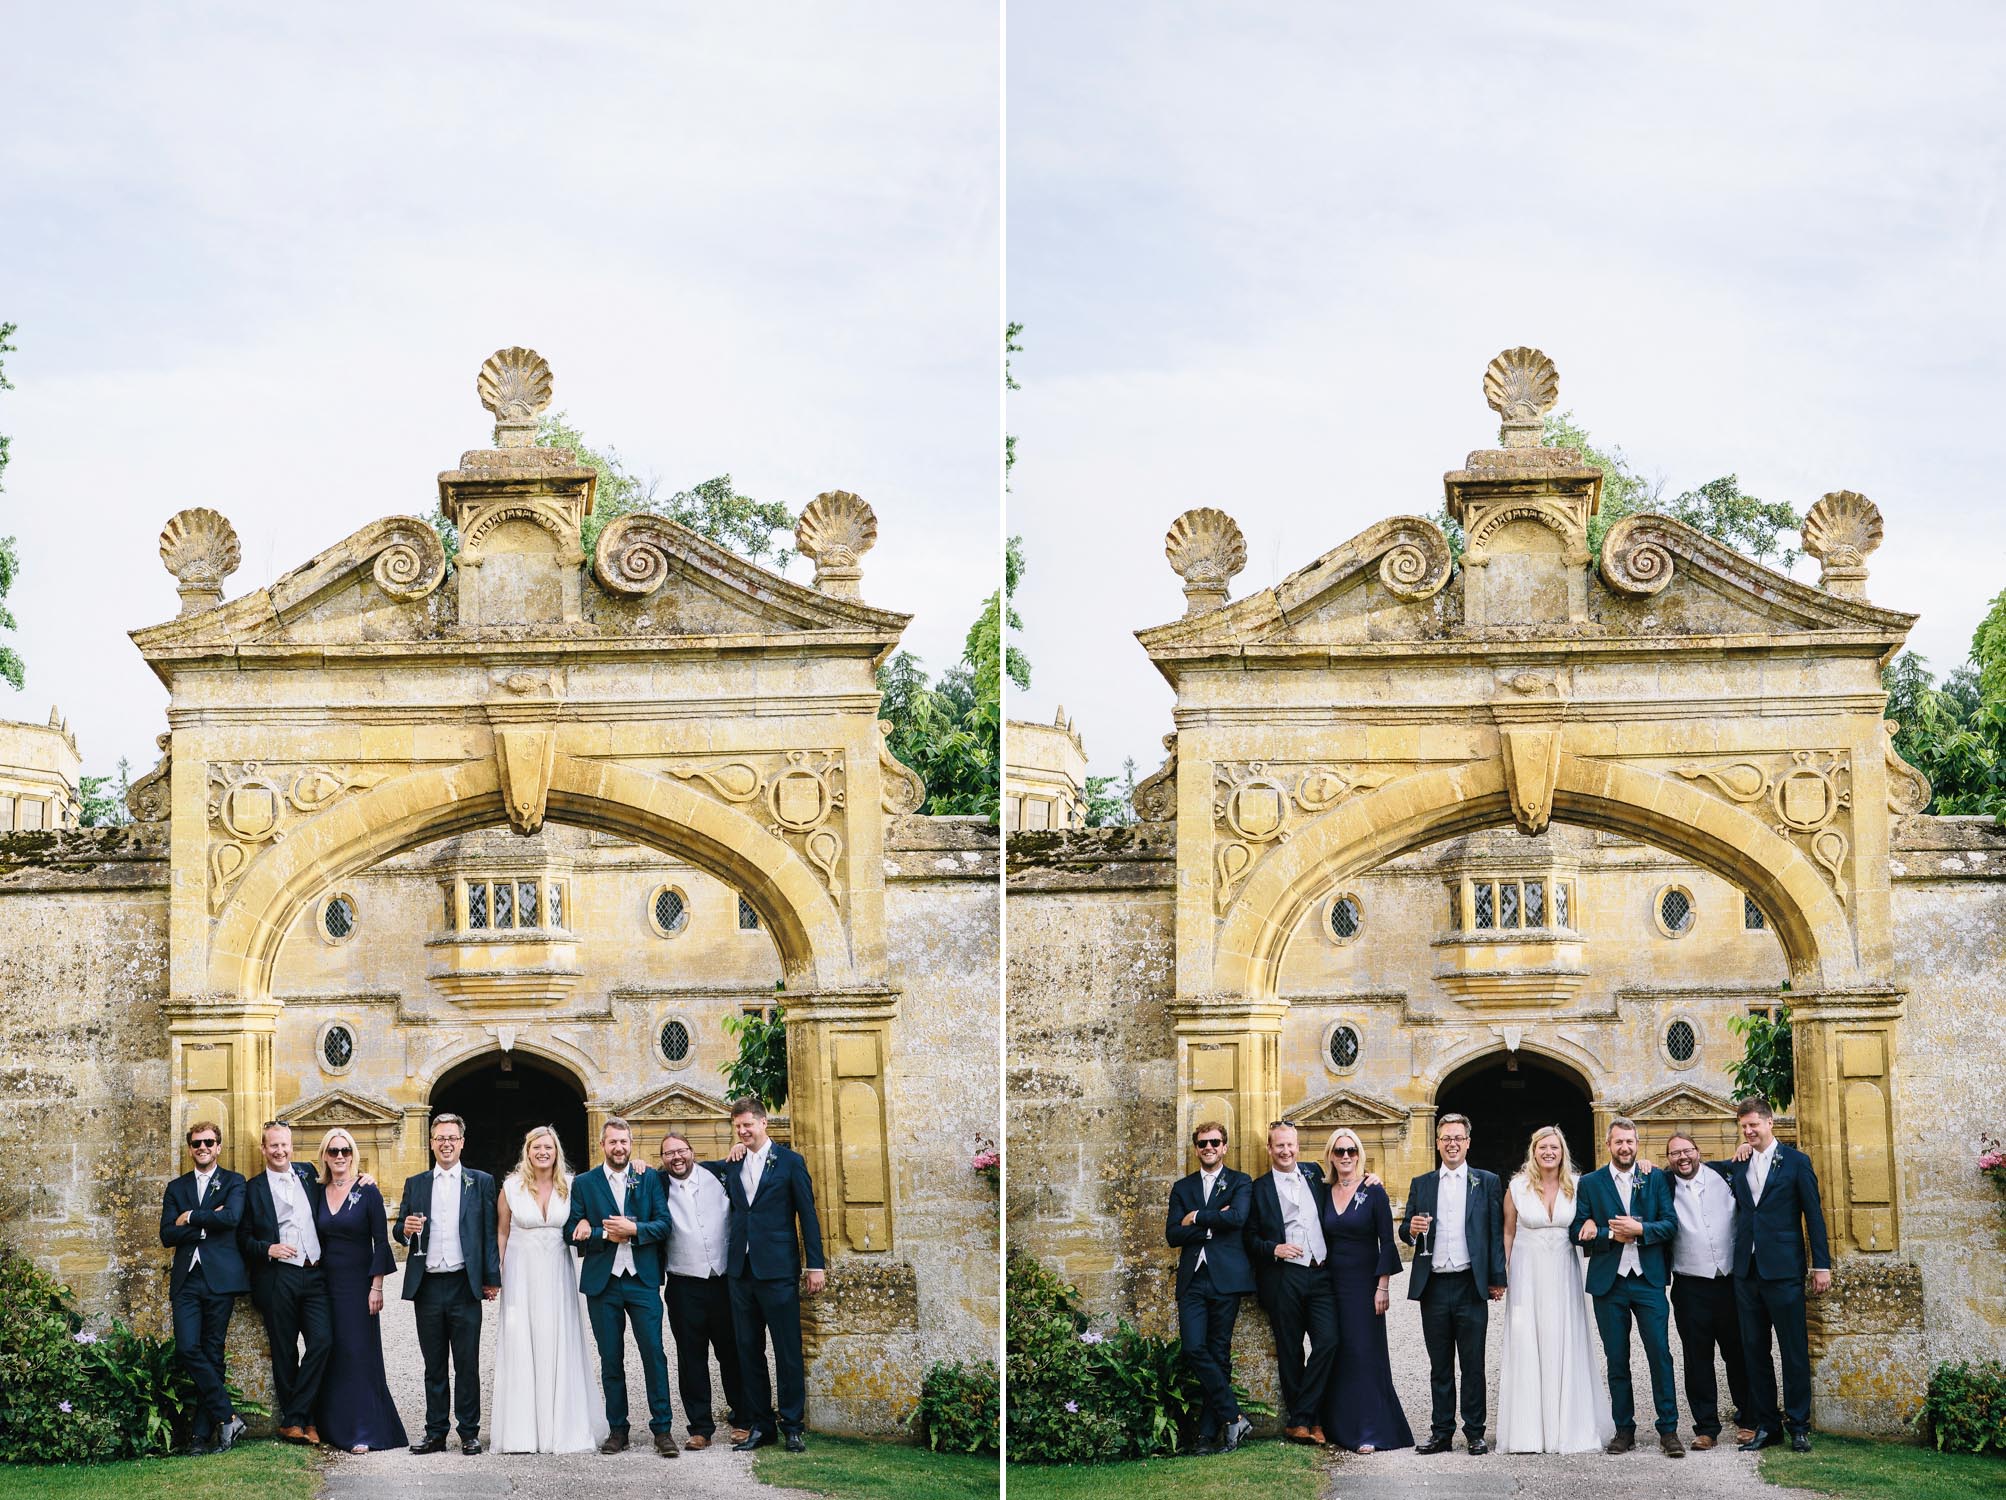 The wedding party at Stanway